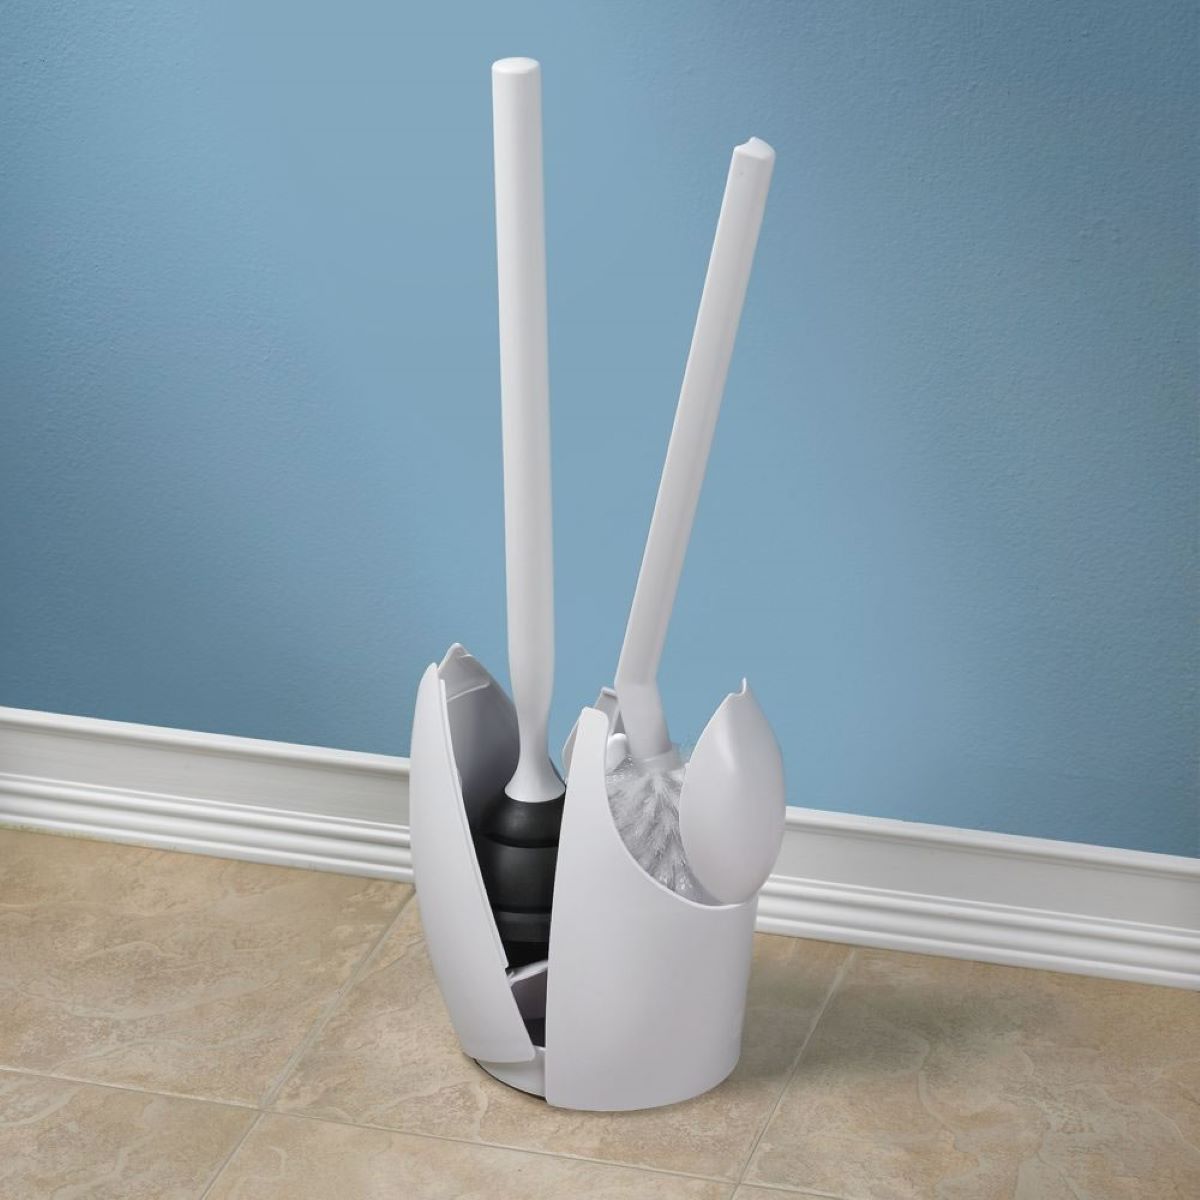 How To Hide Toilet Brush And Plunger